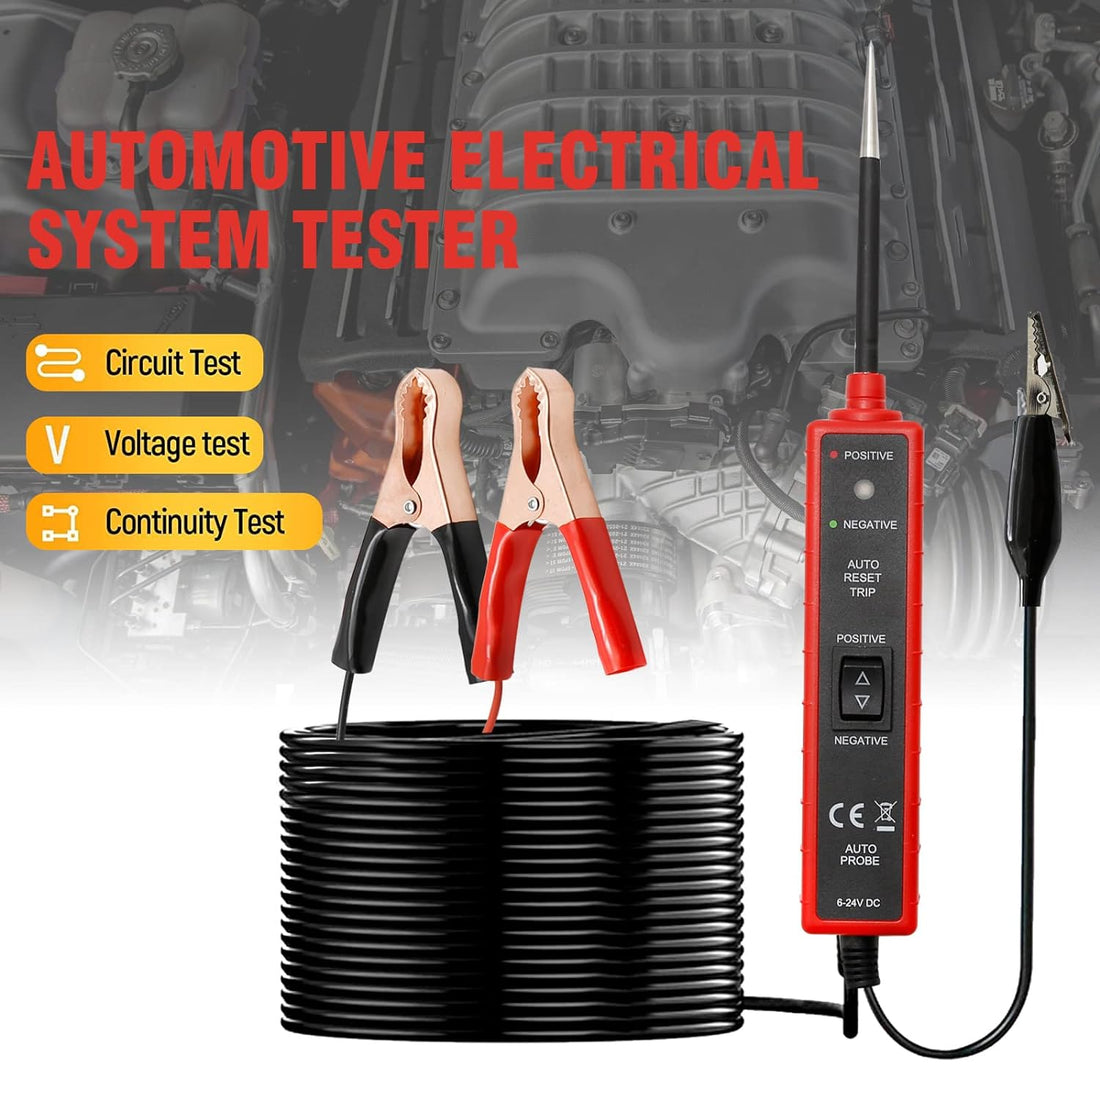 Automotive Power Circuit Probe Tester Test Light with 4M Test Lead 6-24V DC Led Light Battery Tester Fuse Tester 12V Wire Circuit Tester Auto Electrical System Tools Car Truck Circuit Test Pen